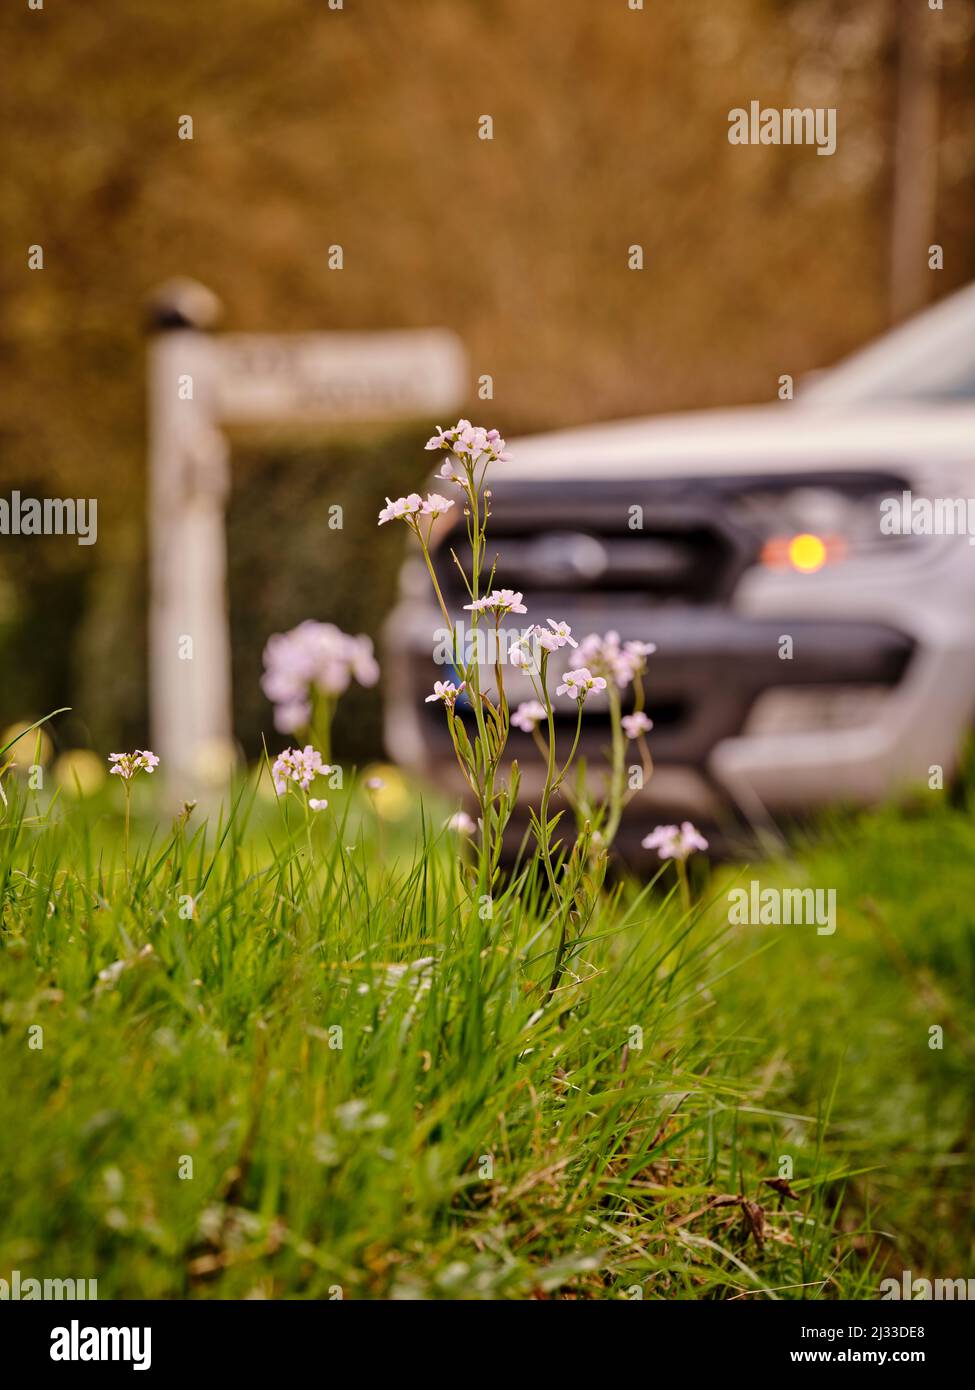 Lady's smock on roadside verges in East Hoathly, East Sussex, UK, photographed as a car speeds past. Stock Photo